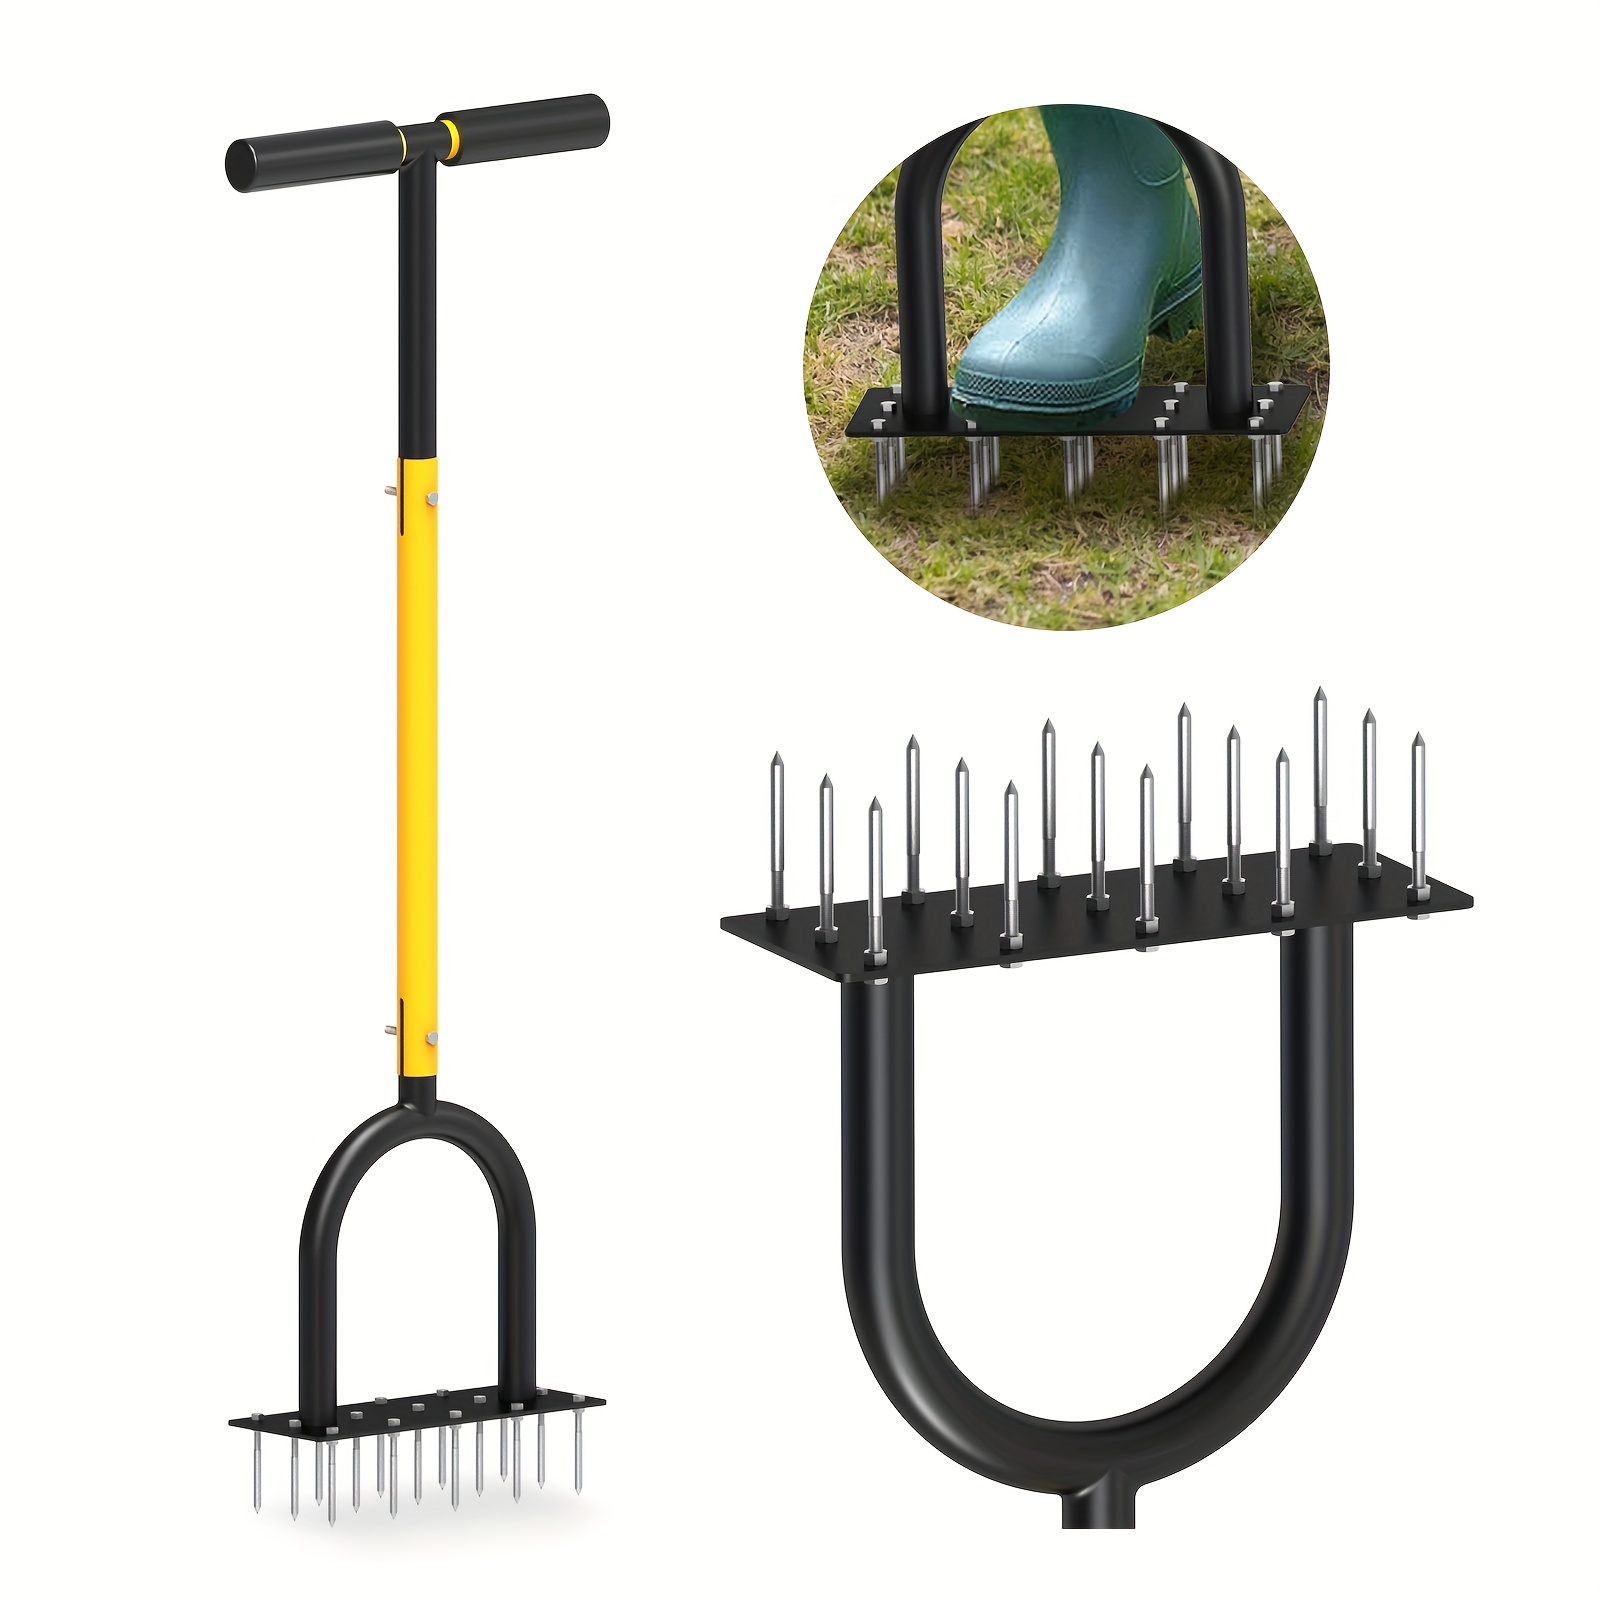 

1pc, Heavy Duty Manual Lawn Aerator Tool With 16 Spikes, 11.2 X 9.5 Inches, Powder Coated Metal With Cushioned T-handle, Foot Plate For Easy Soil Penetration Outdoor Yard Aerating Equipment